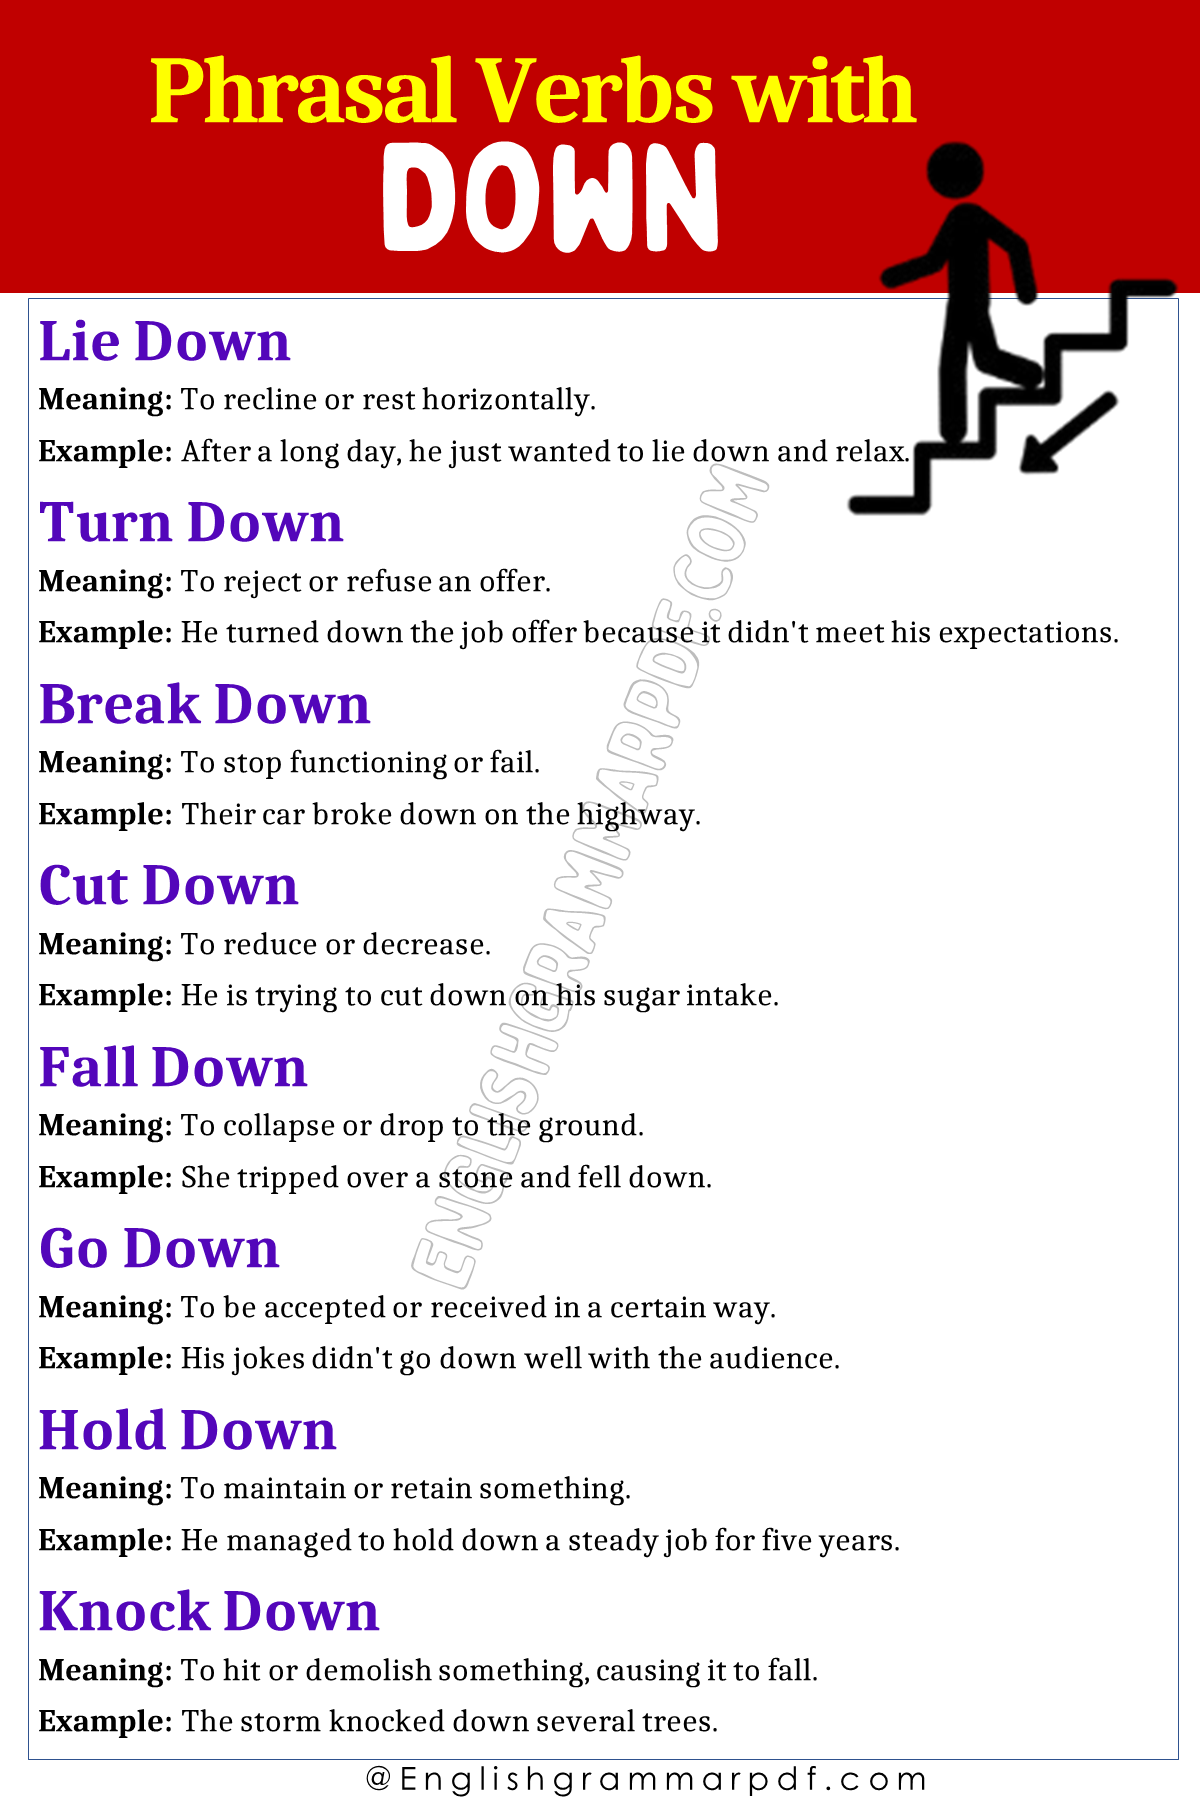 Phrasal Verbs with Down